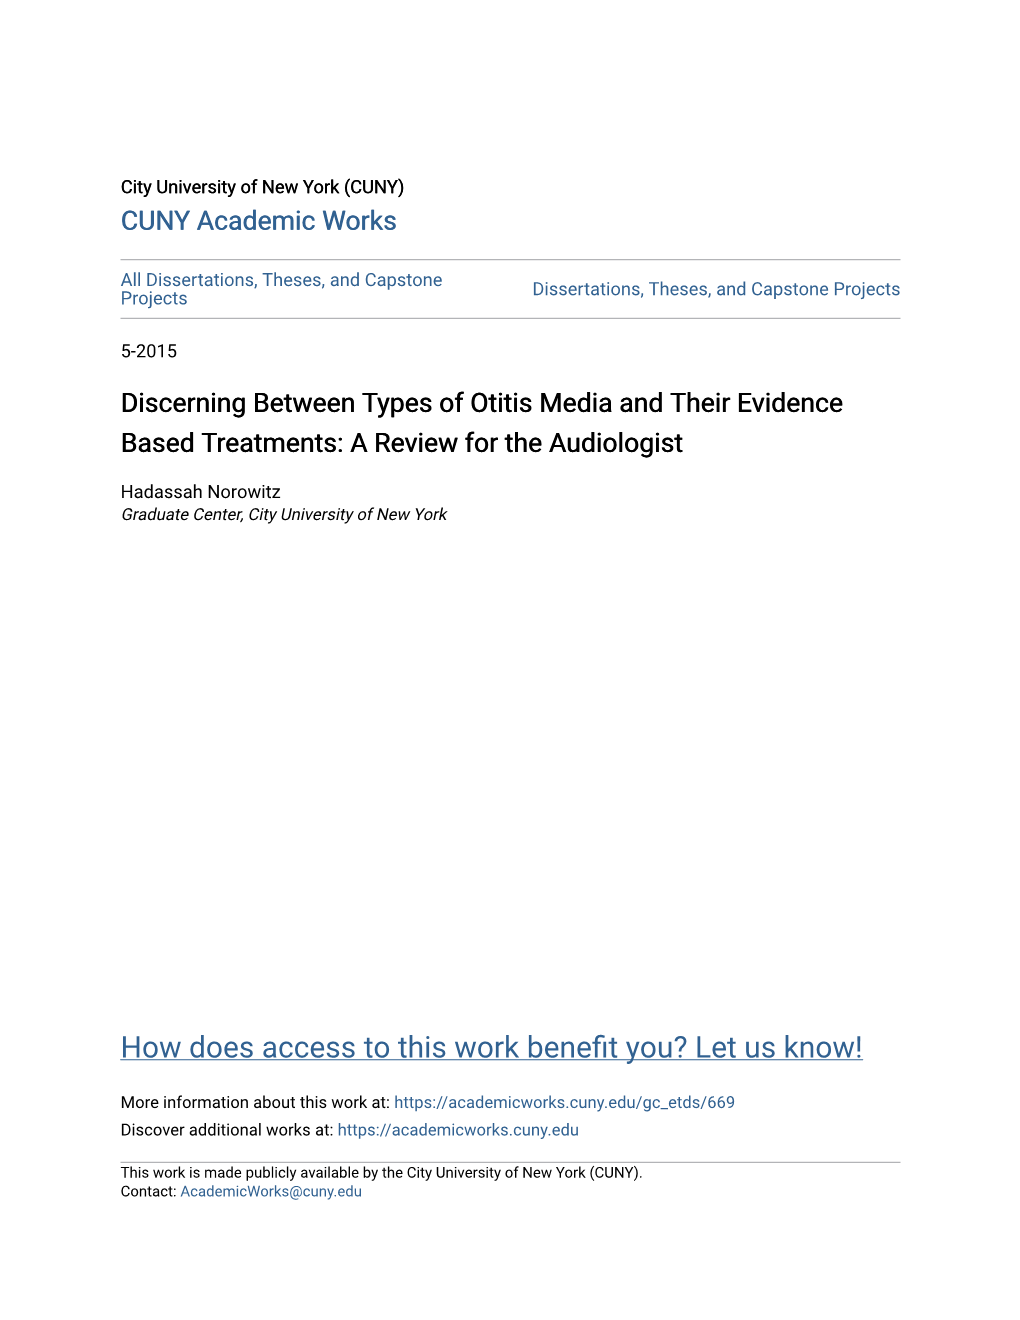 Discerning Between Types of Otitis Media and Their Evidence Based Treatments: a Review for the Audiologist